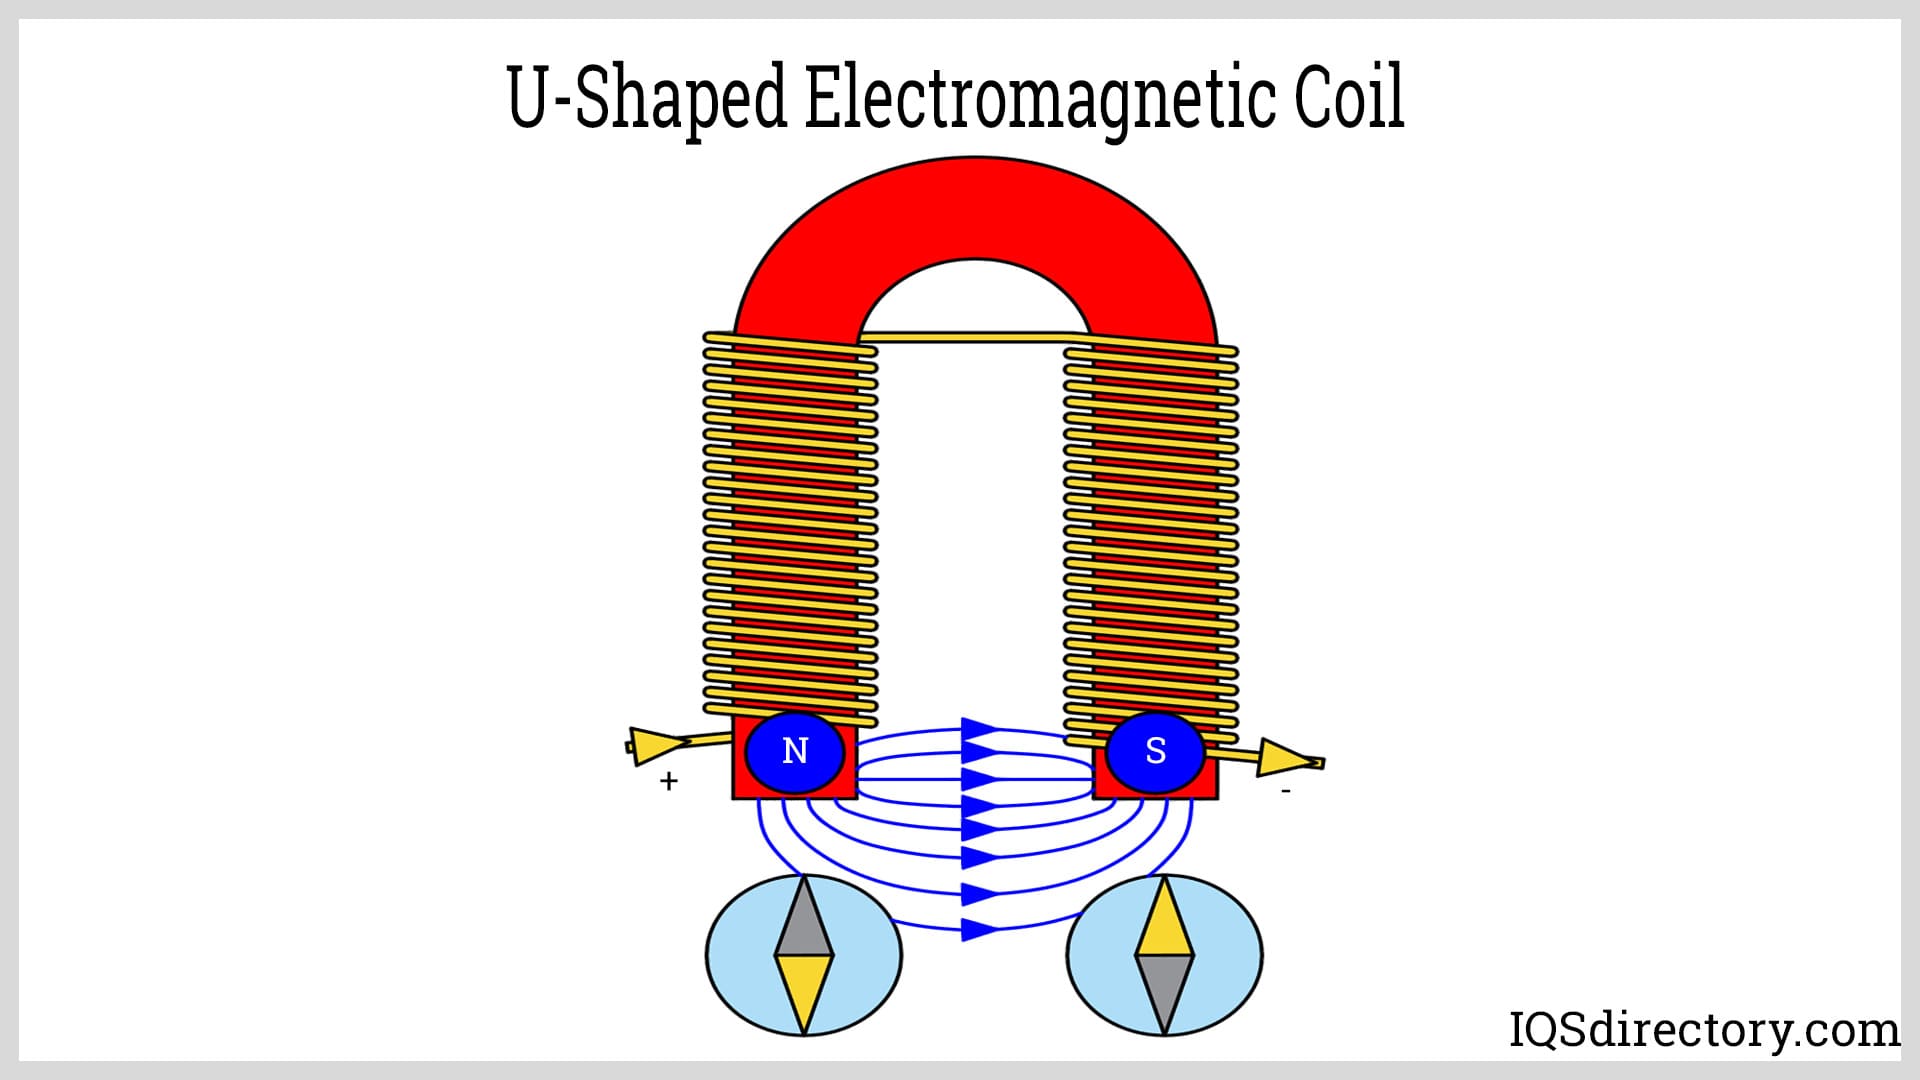 U-Shaped Electromagnetic Coil